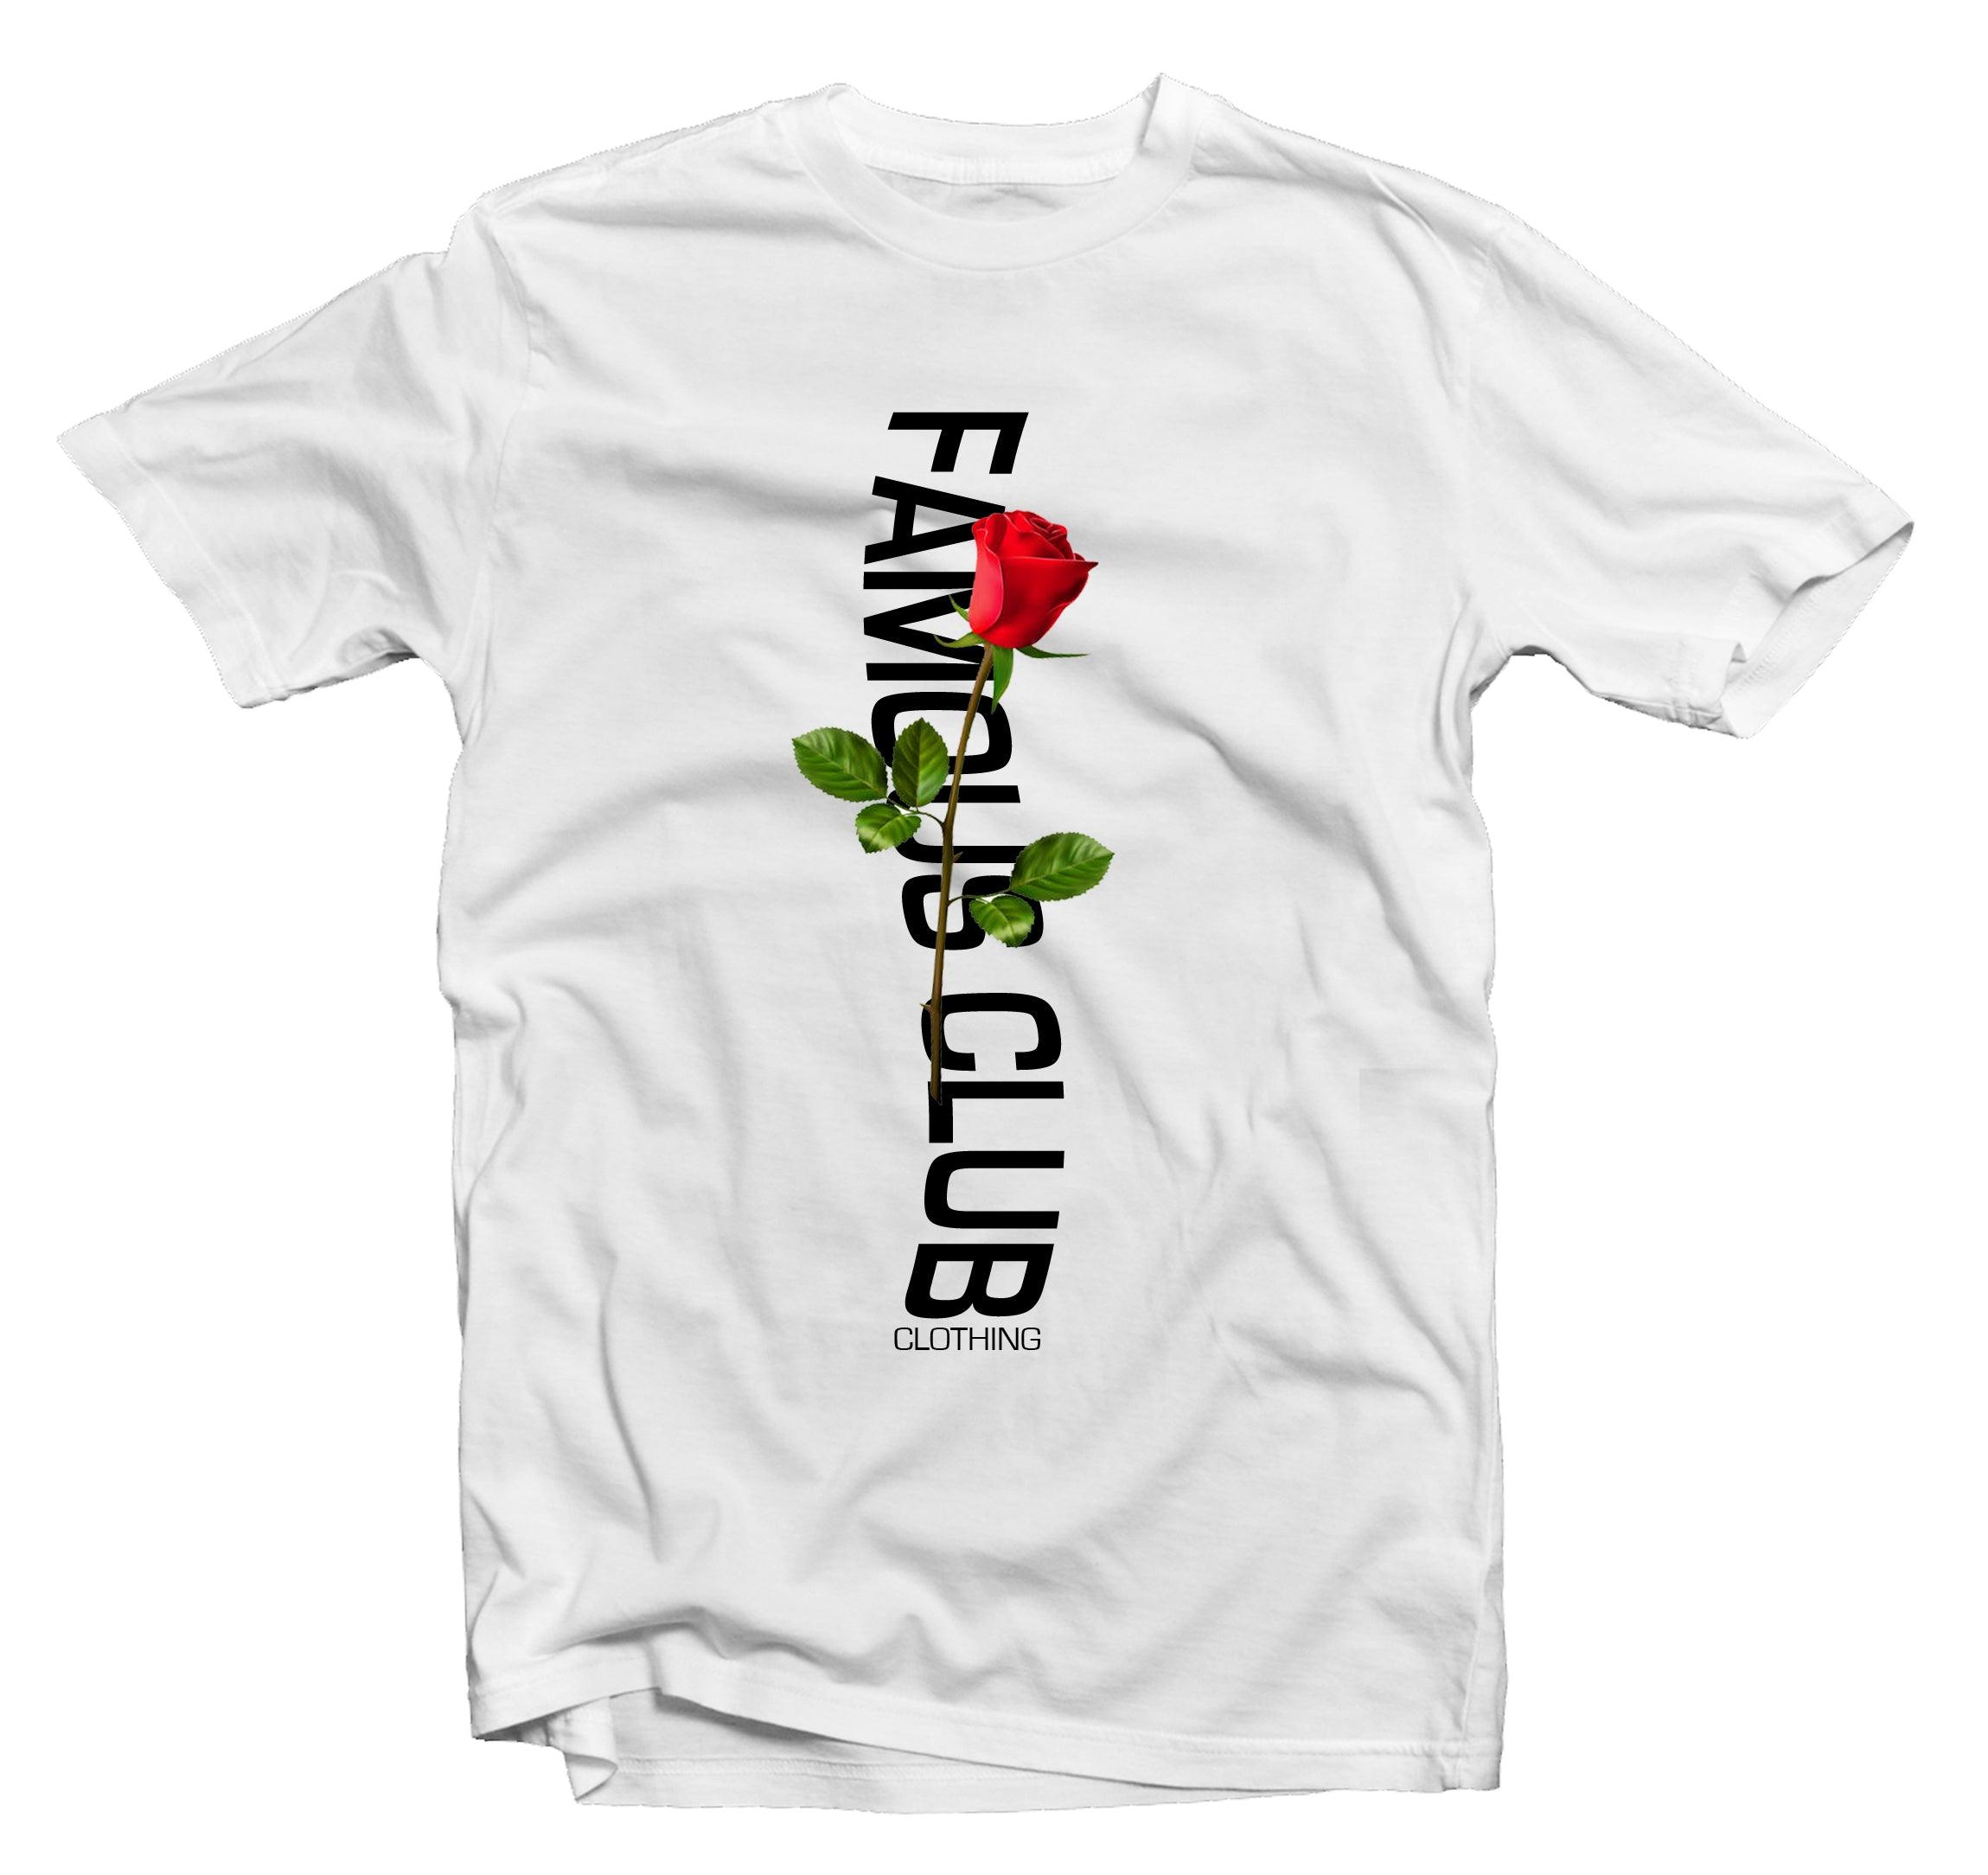 ROSE Tees - Famous Club Clothing